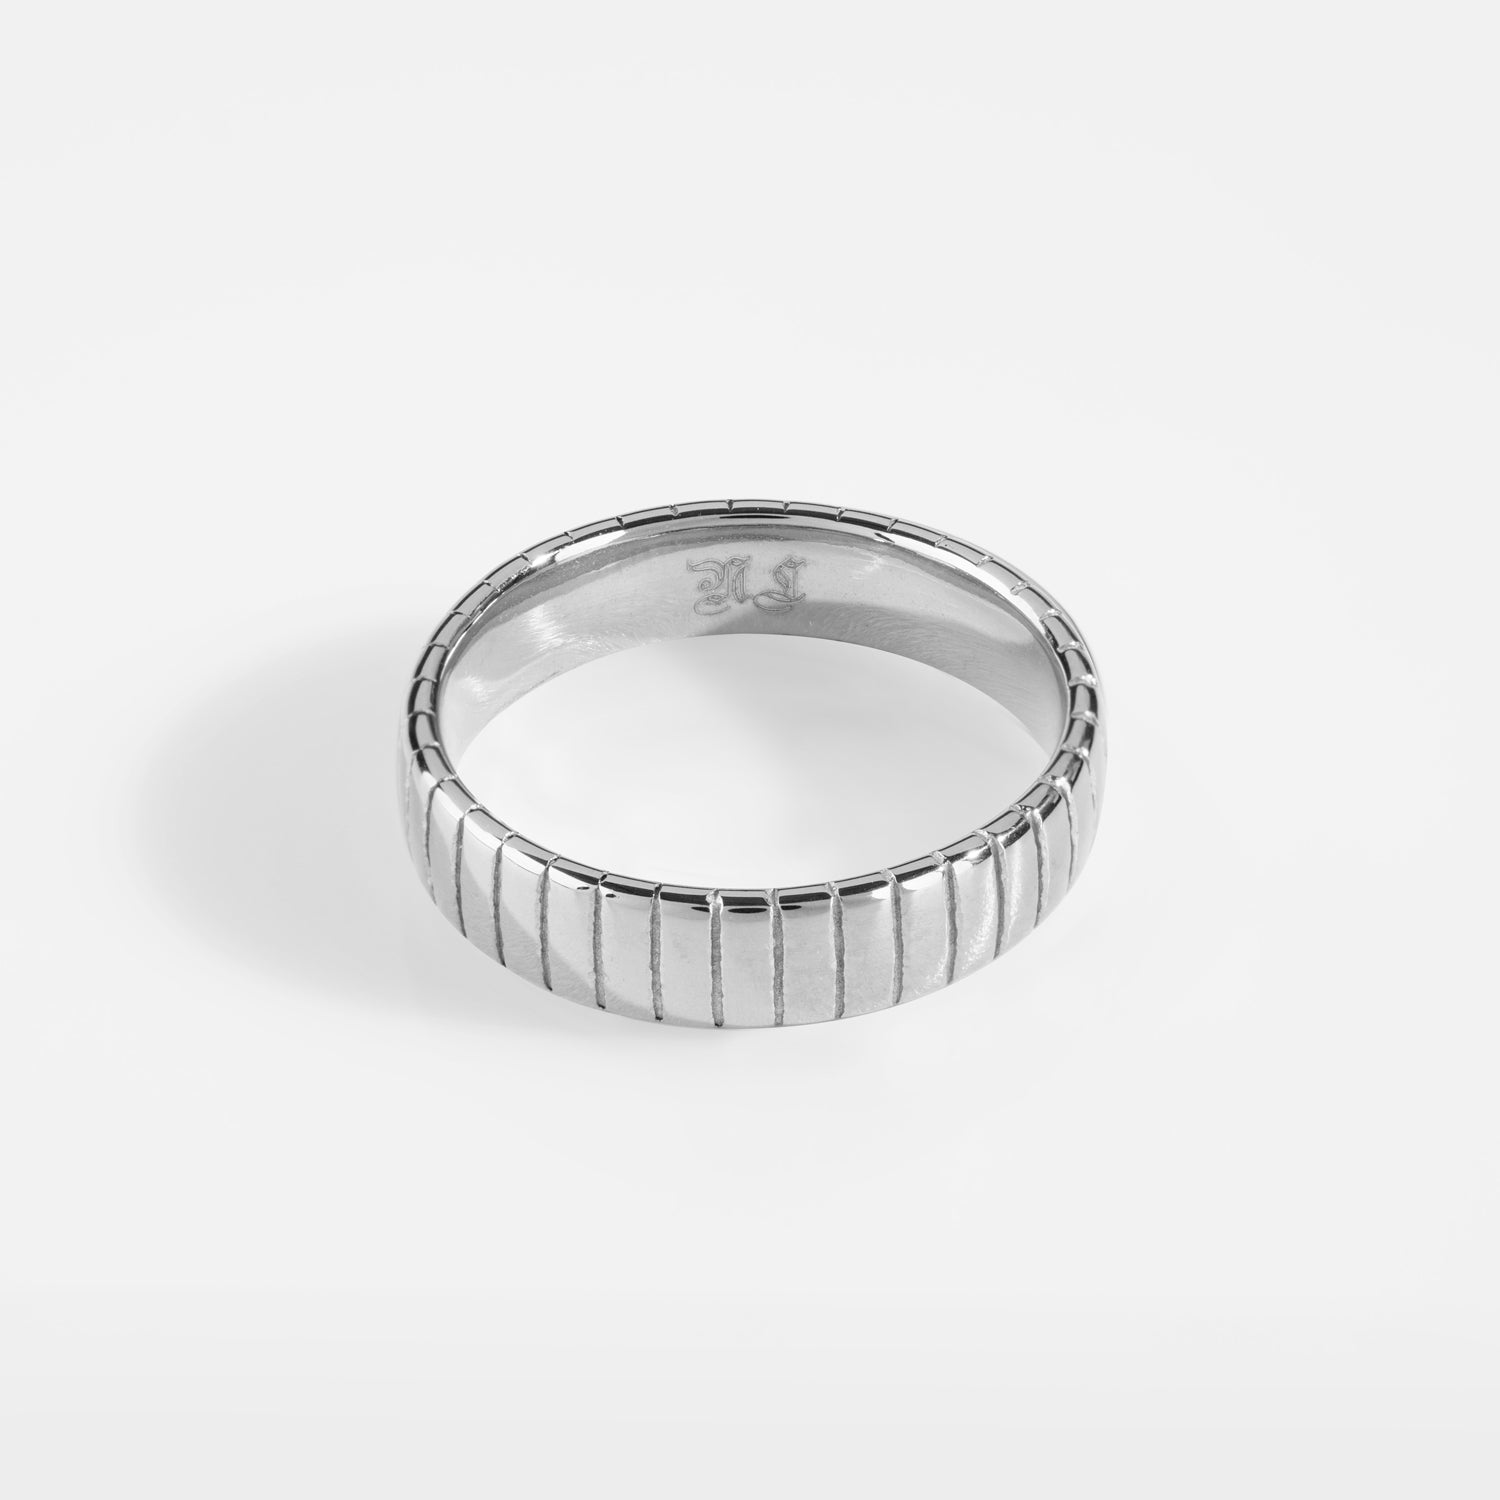 Siempre Cut band - Silver-toned ring